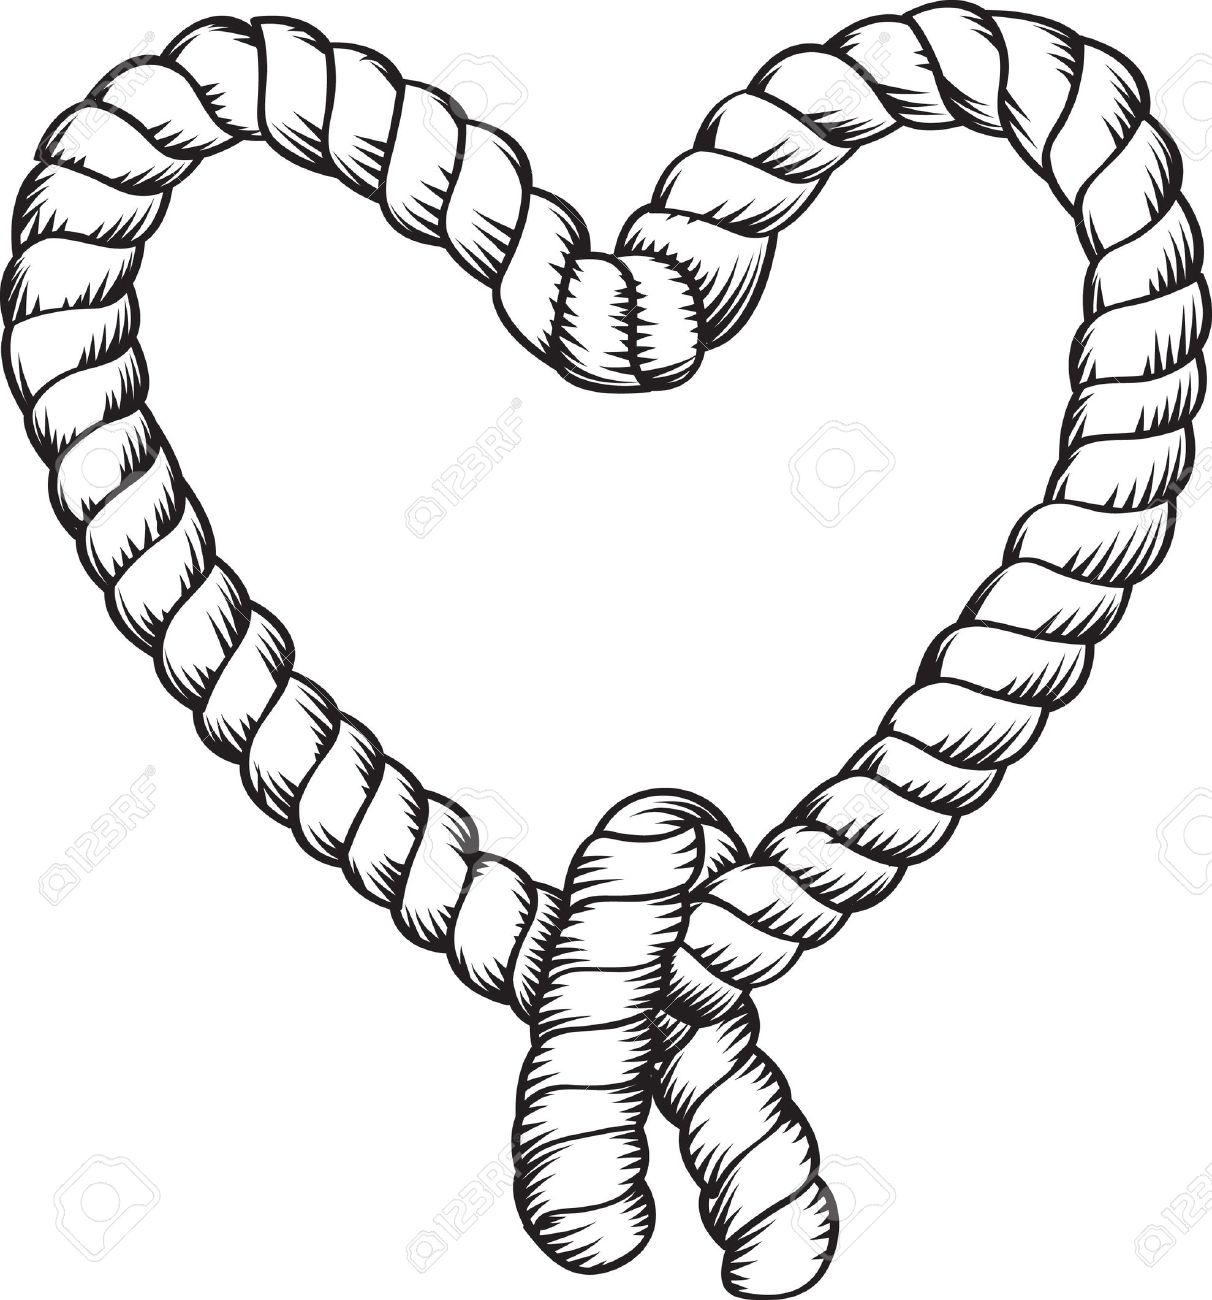 rope knot: heart shape tied .